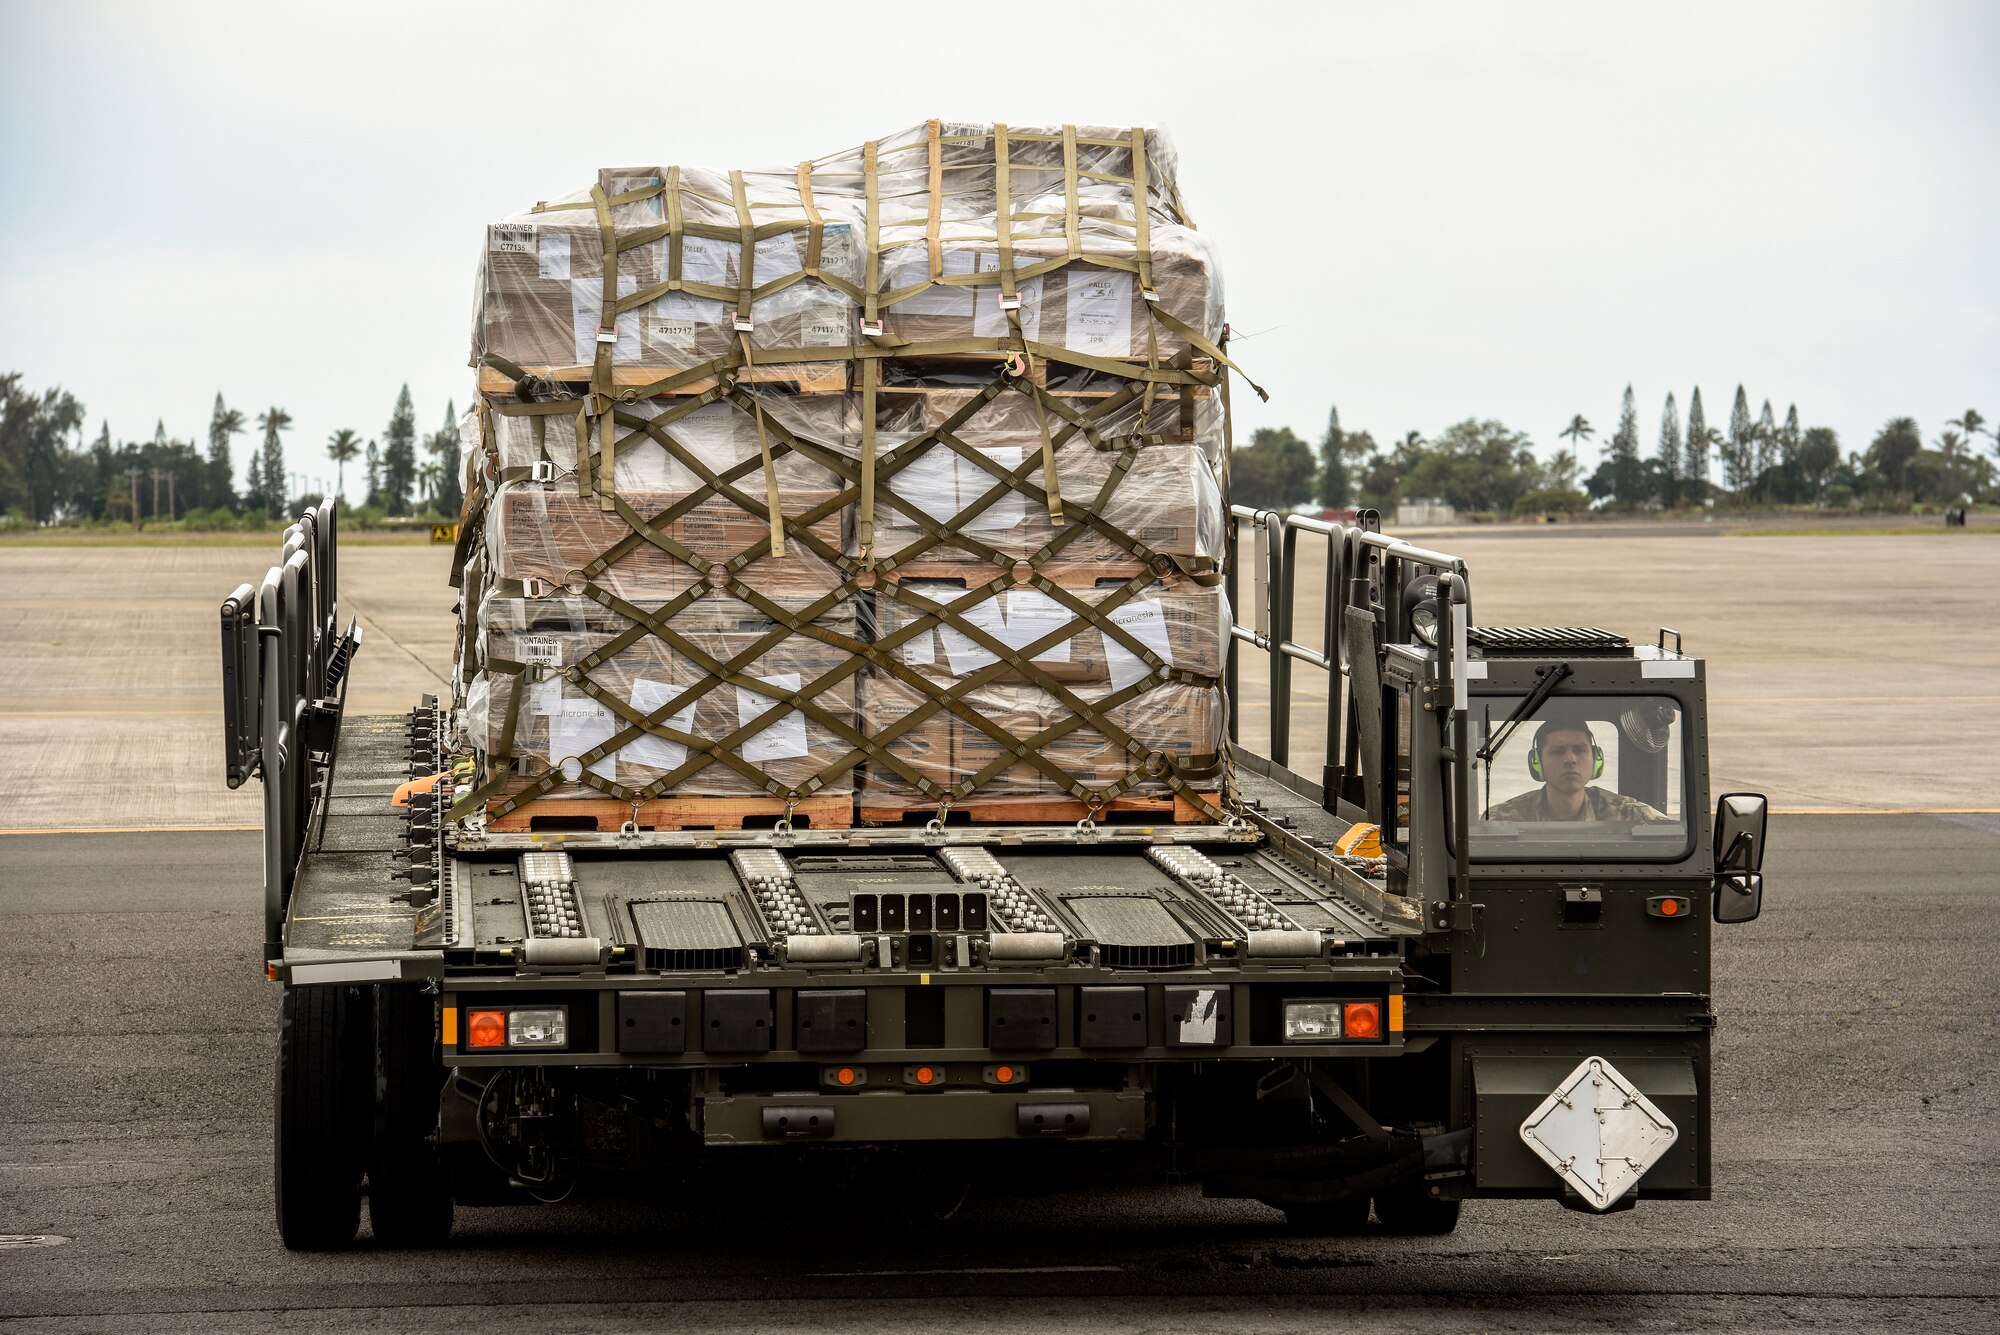 U.S. Air Force Senior Airman Mario Garcia, 735th Air Mobility Squadron air freight journeyman, drives a Tunner 60K loader with cargo to the 735th AMS dock at Joint Base Pearl Harbor-Hickam, Hawaii, March 31, 2020. The 735th AMS supports global airlift in the Indo-Pacific region. (U.S. Air Force photo by Tech. Sgt. Anthony Nelson Jr.)